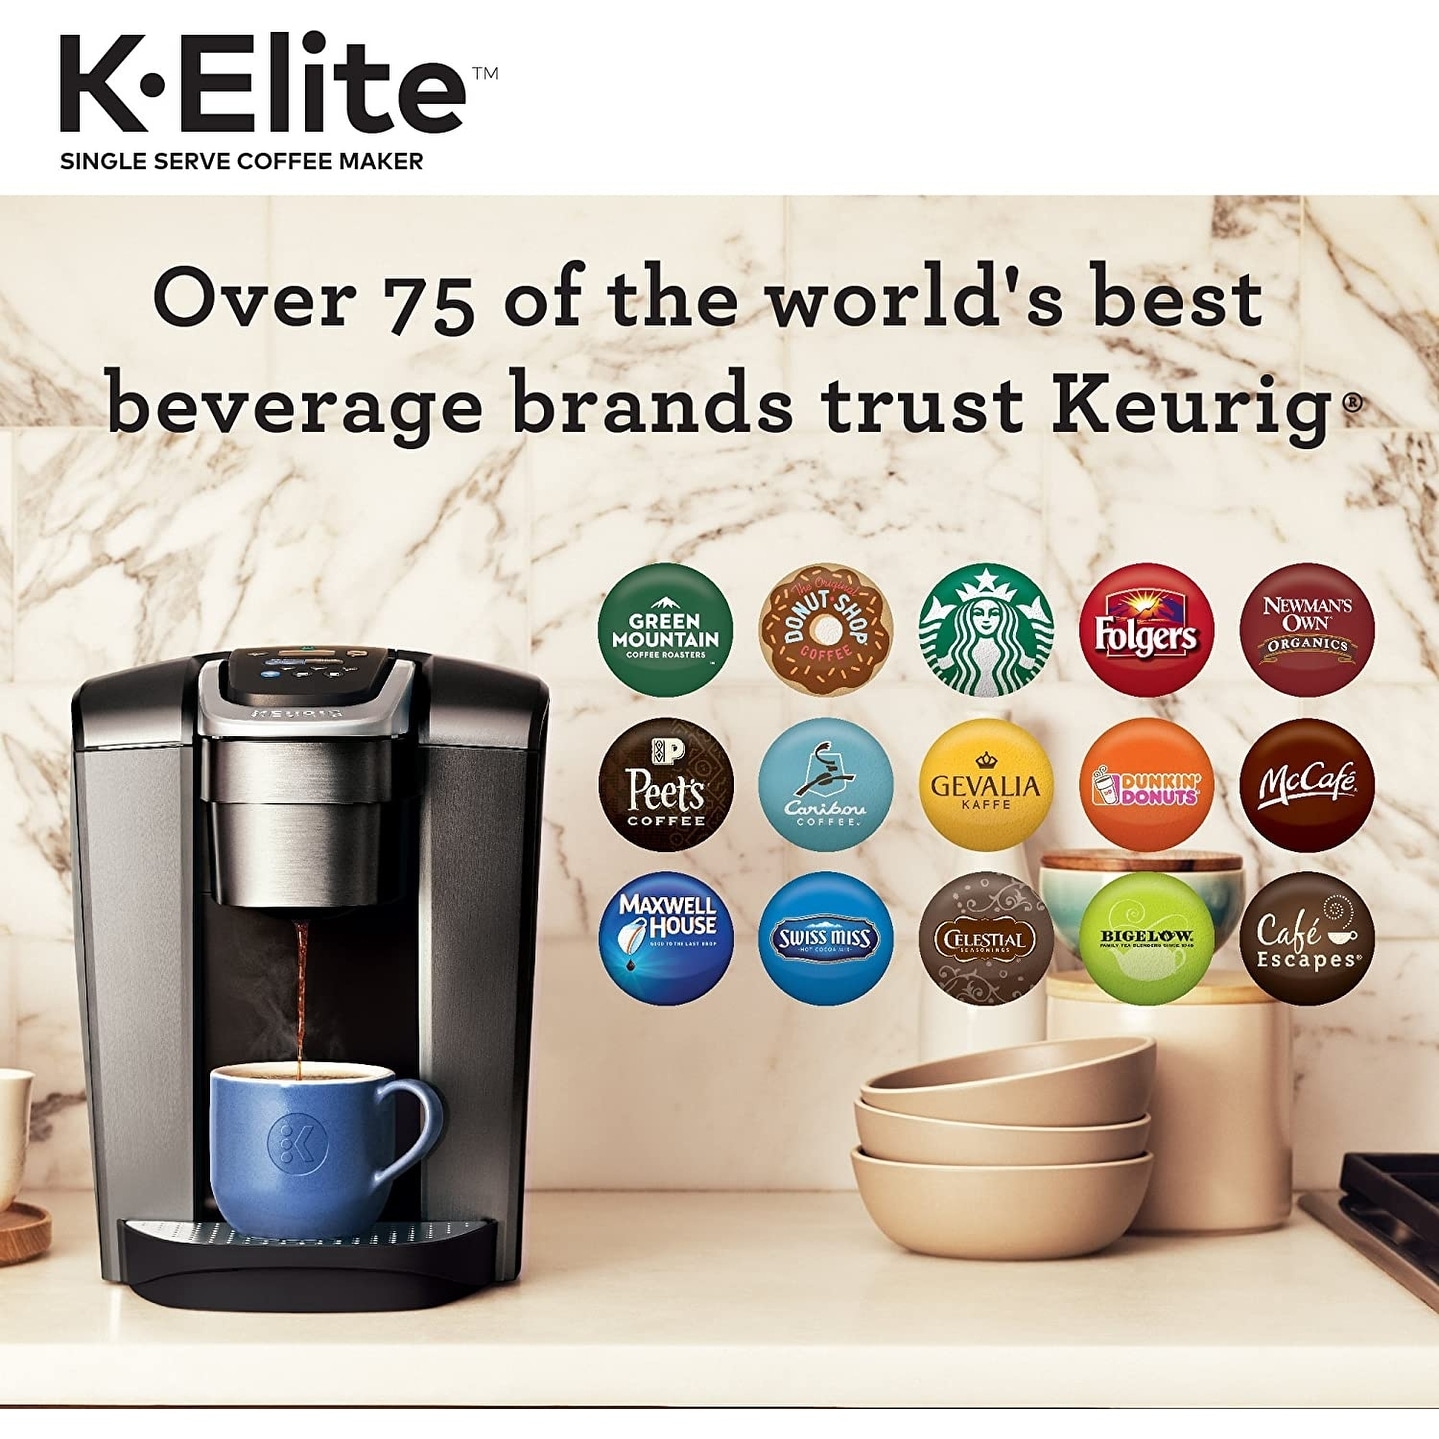 https://ak1.ostkcdn.com/images/products/is/images/direct/bfd04a5be980ab266dc4bc6ad392e8d8e16a213e/Keurig-K-Elite-Coffee-Maker%2C-Single-Serve-K-Cup-Pod-Coffee-Brewer%2C-With-Iced-Coffee-Capability.jpg